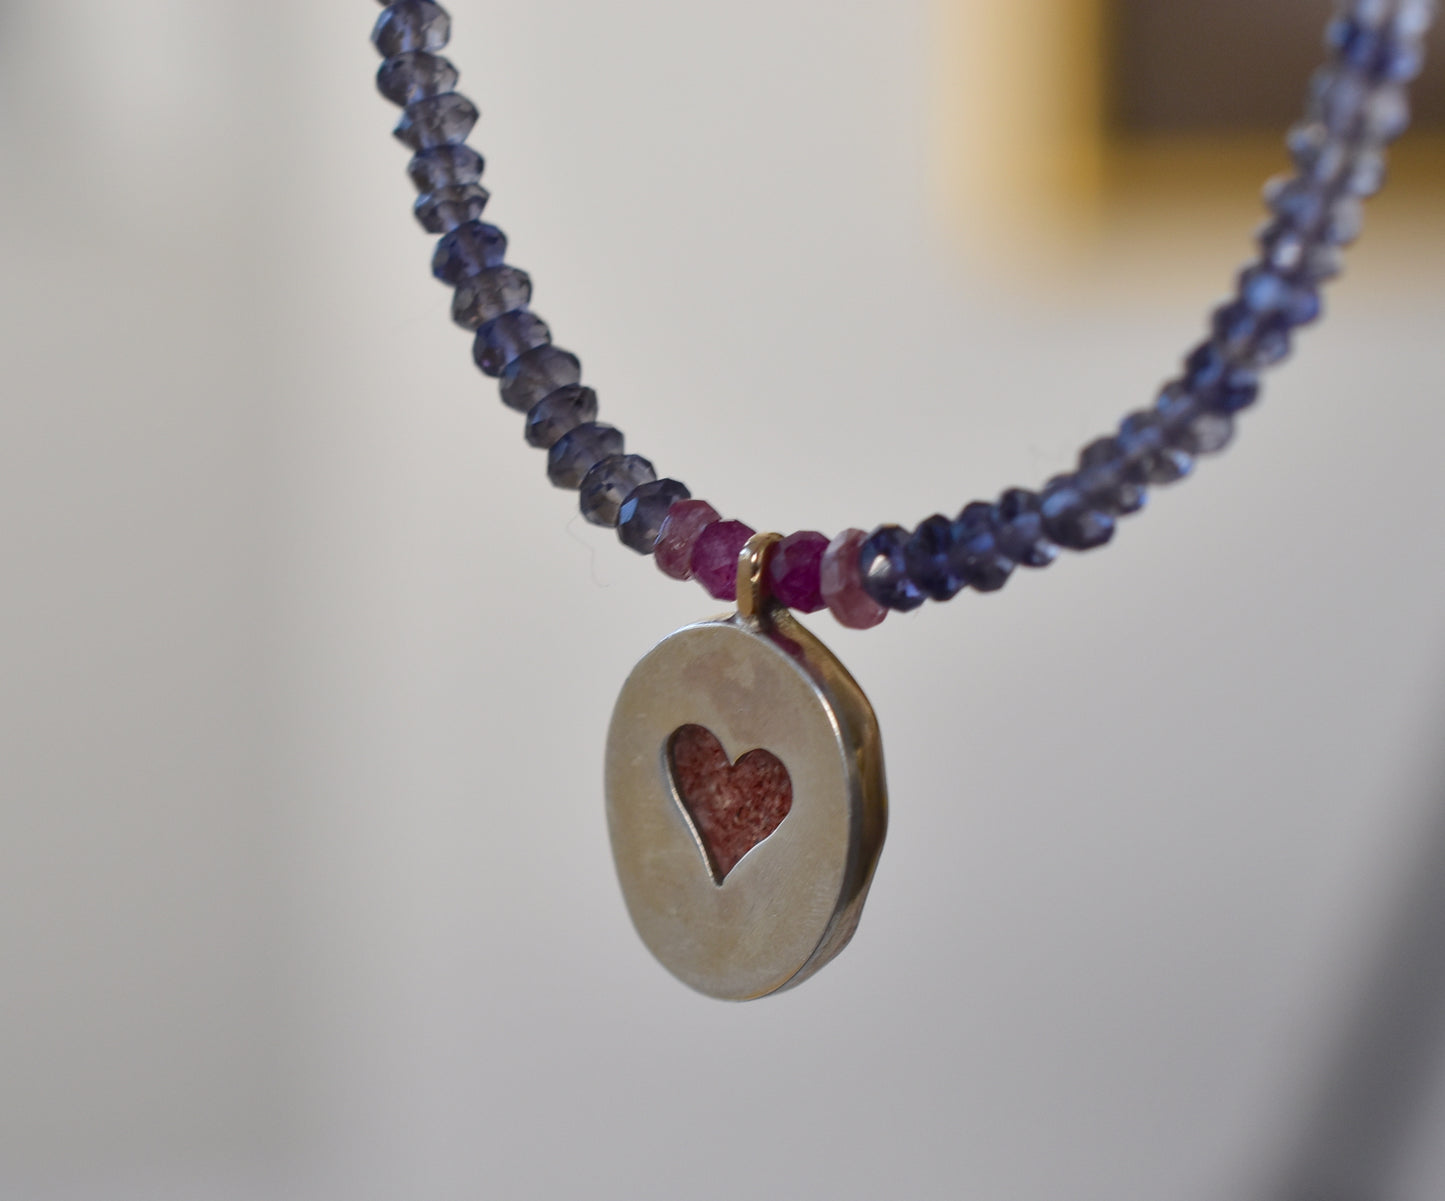 Strawberry Quartz & Iolite Necklace With Rubies, Tourmalines and 14k Gold